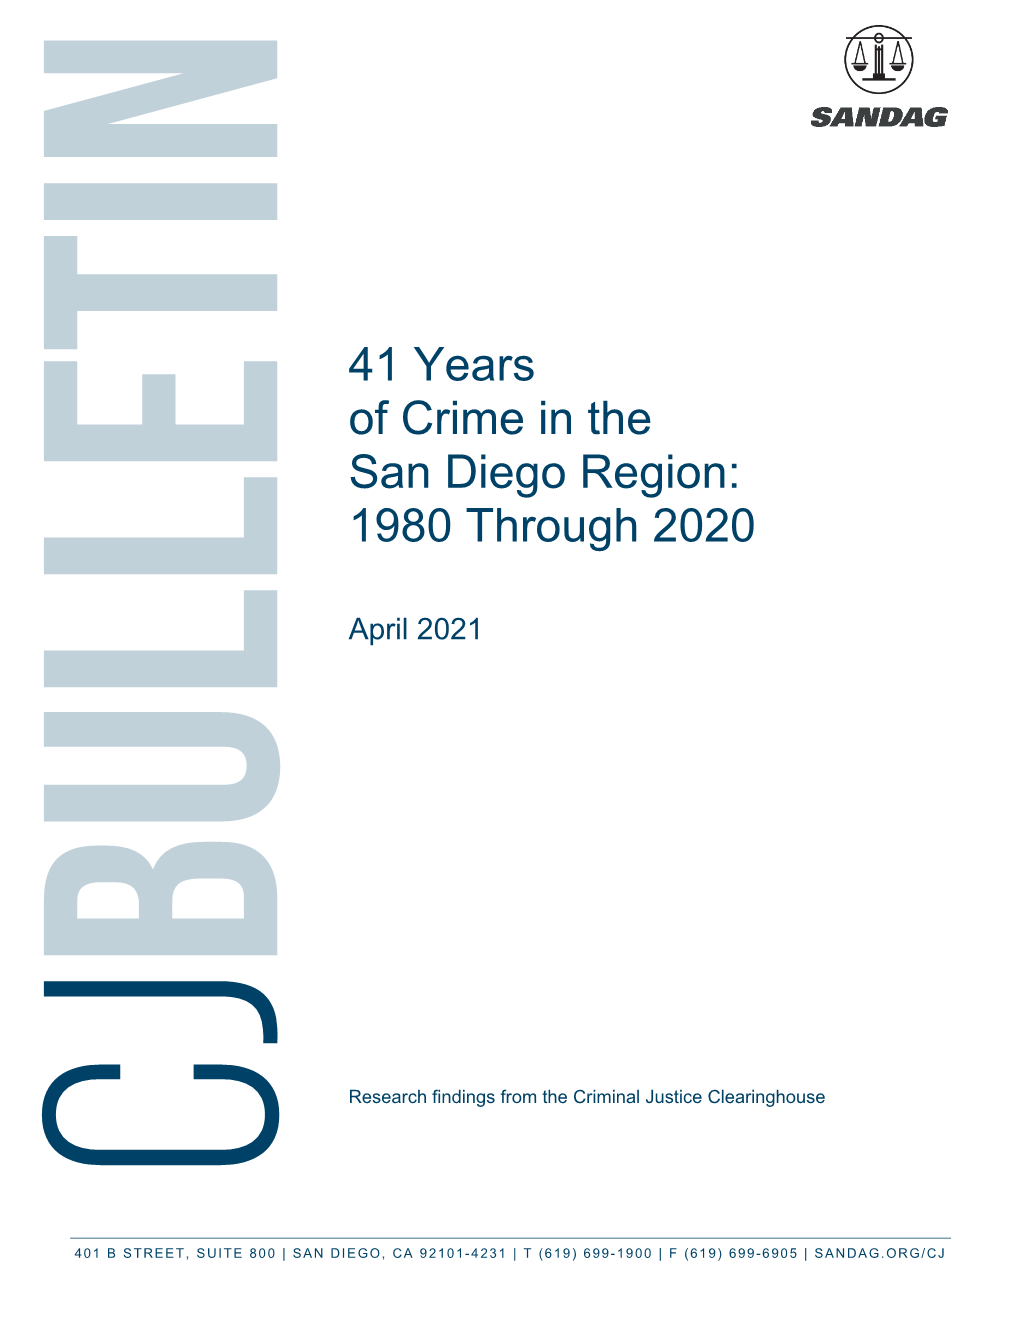 41 Years of Crime in the San Diego Region: 1980 Through 2020